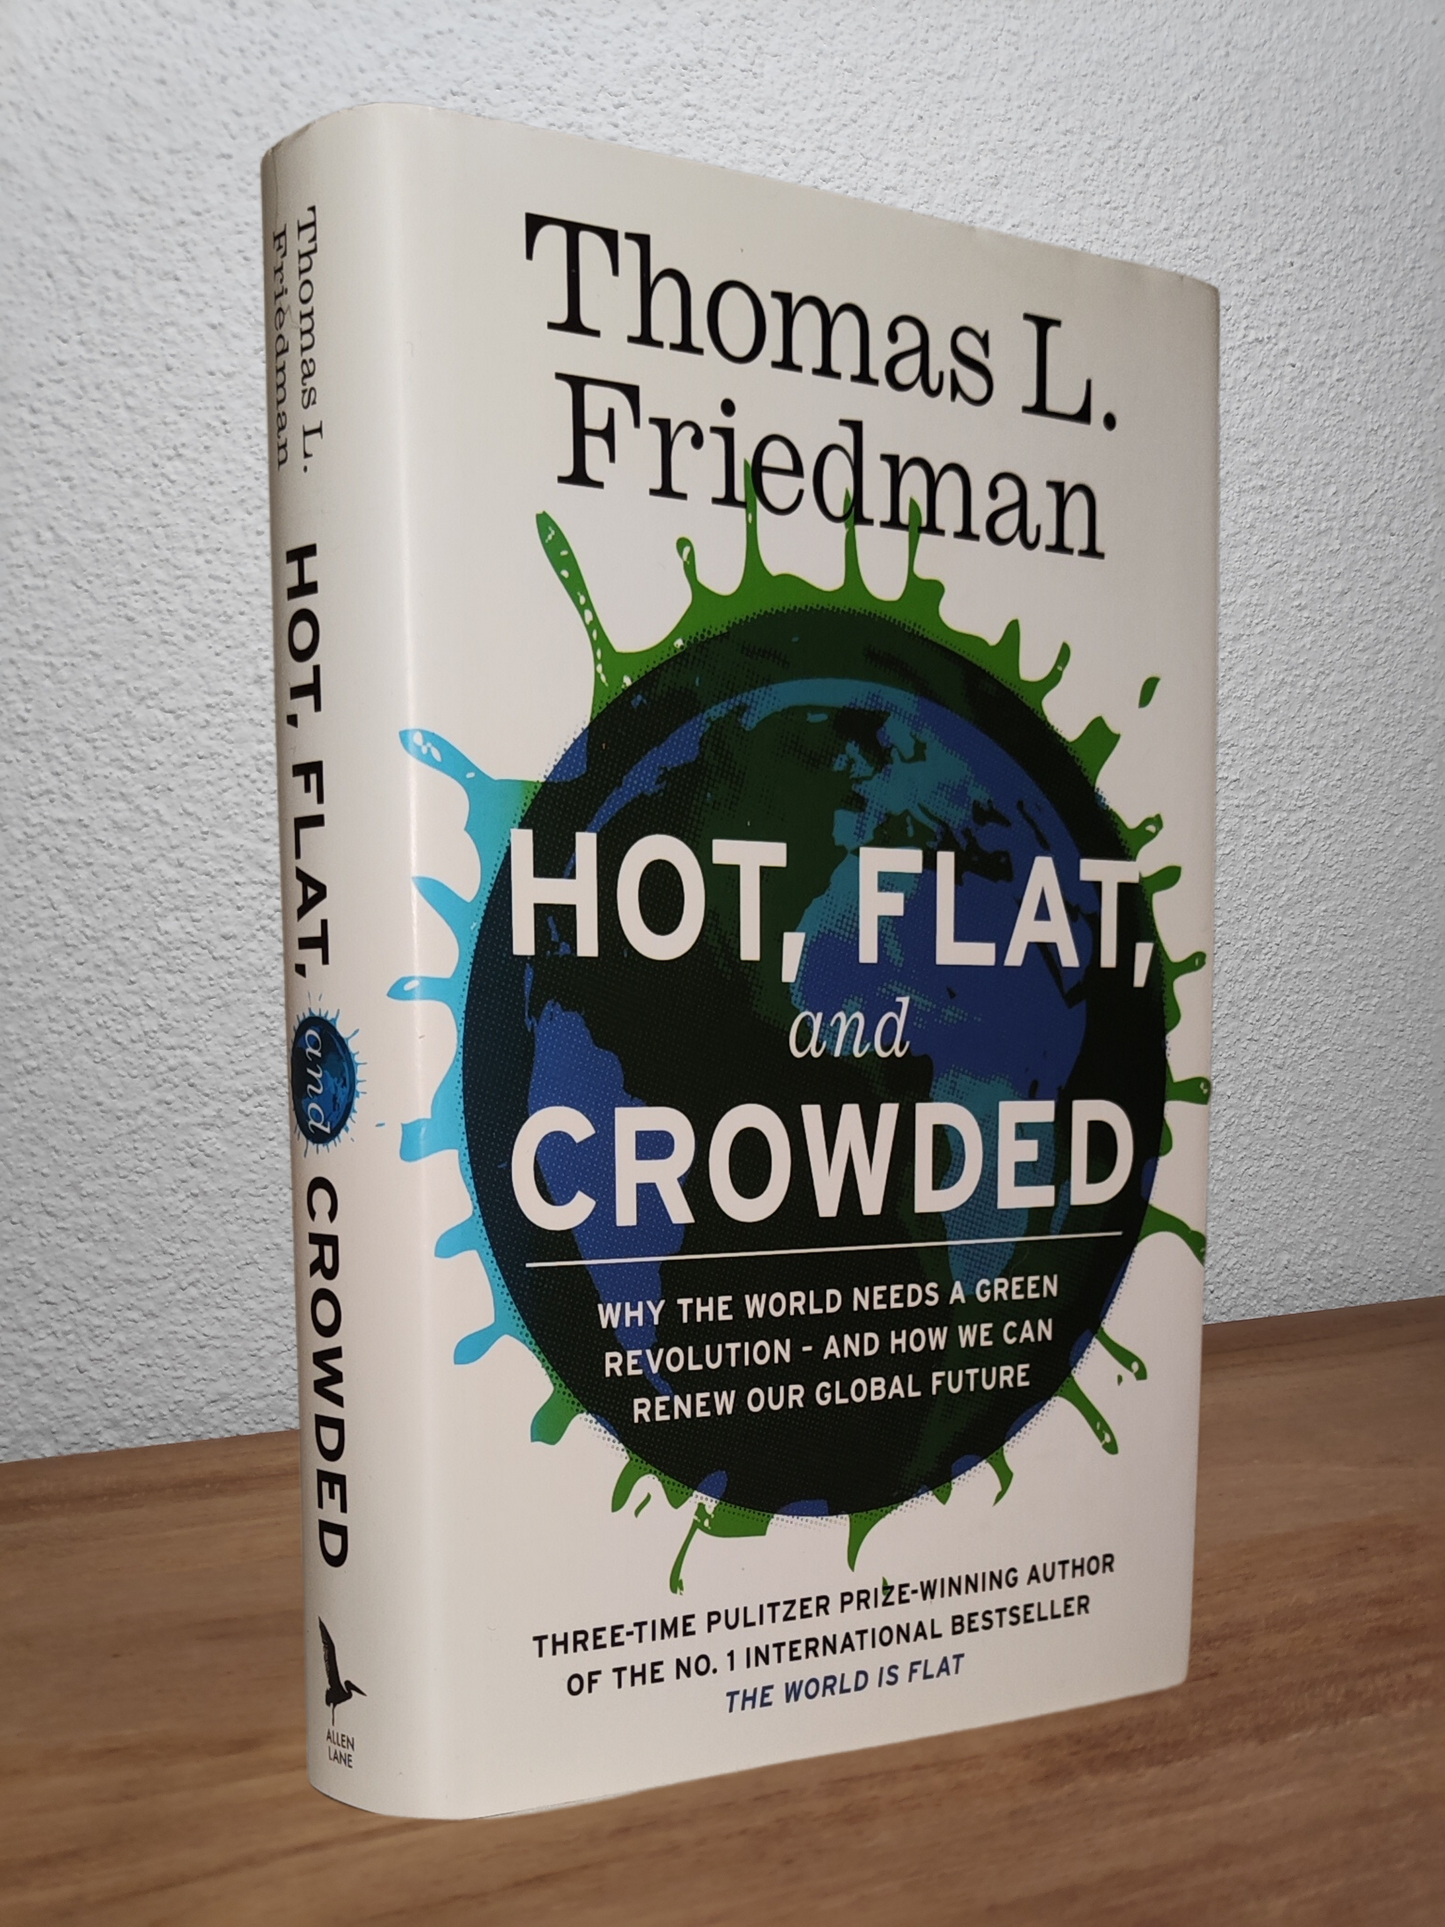 Thomas L. Friedman - Hot, Flat and Crowded  - Second-hand english book to deliver in Zurich & Switzerland